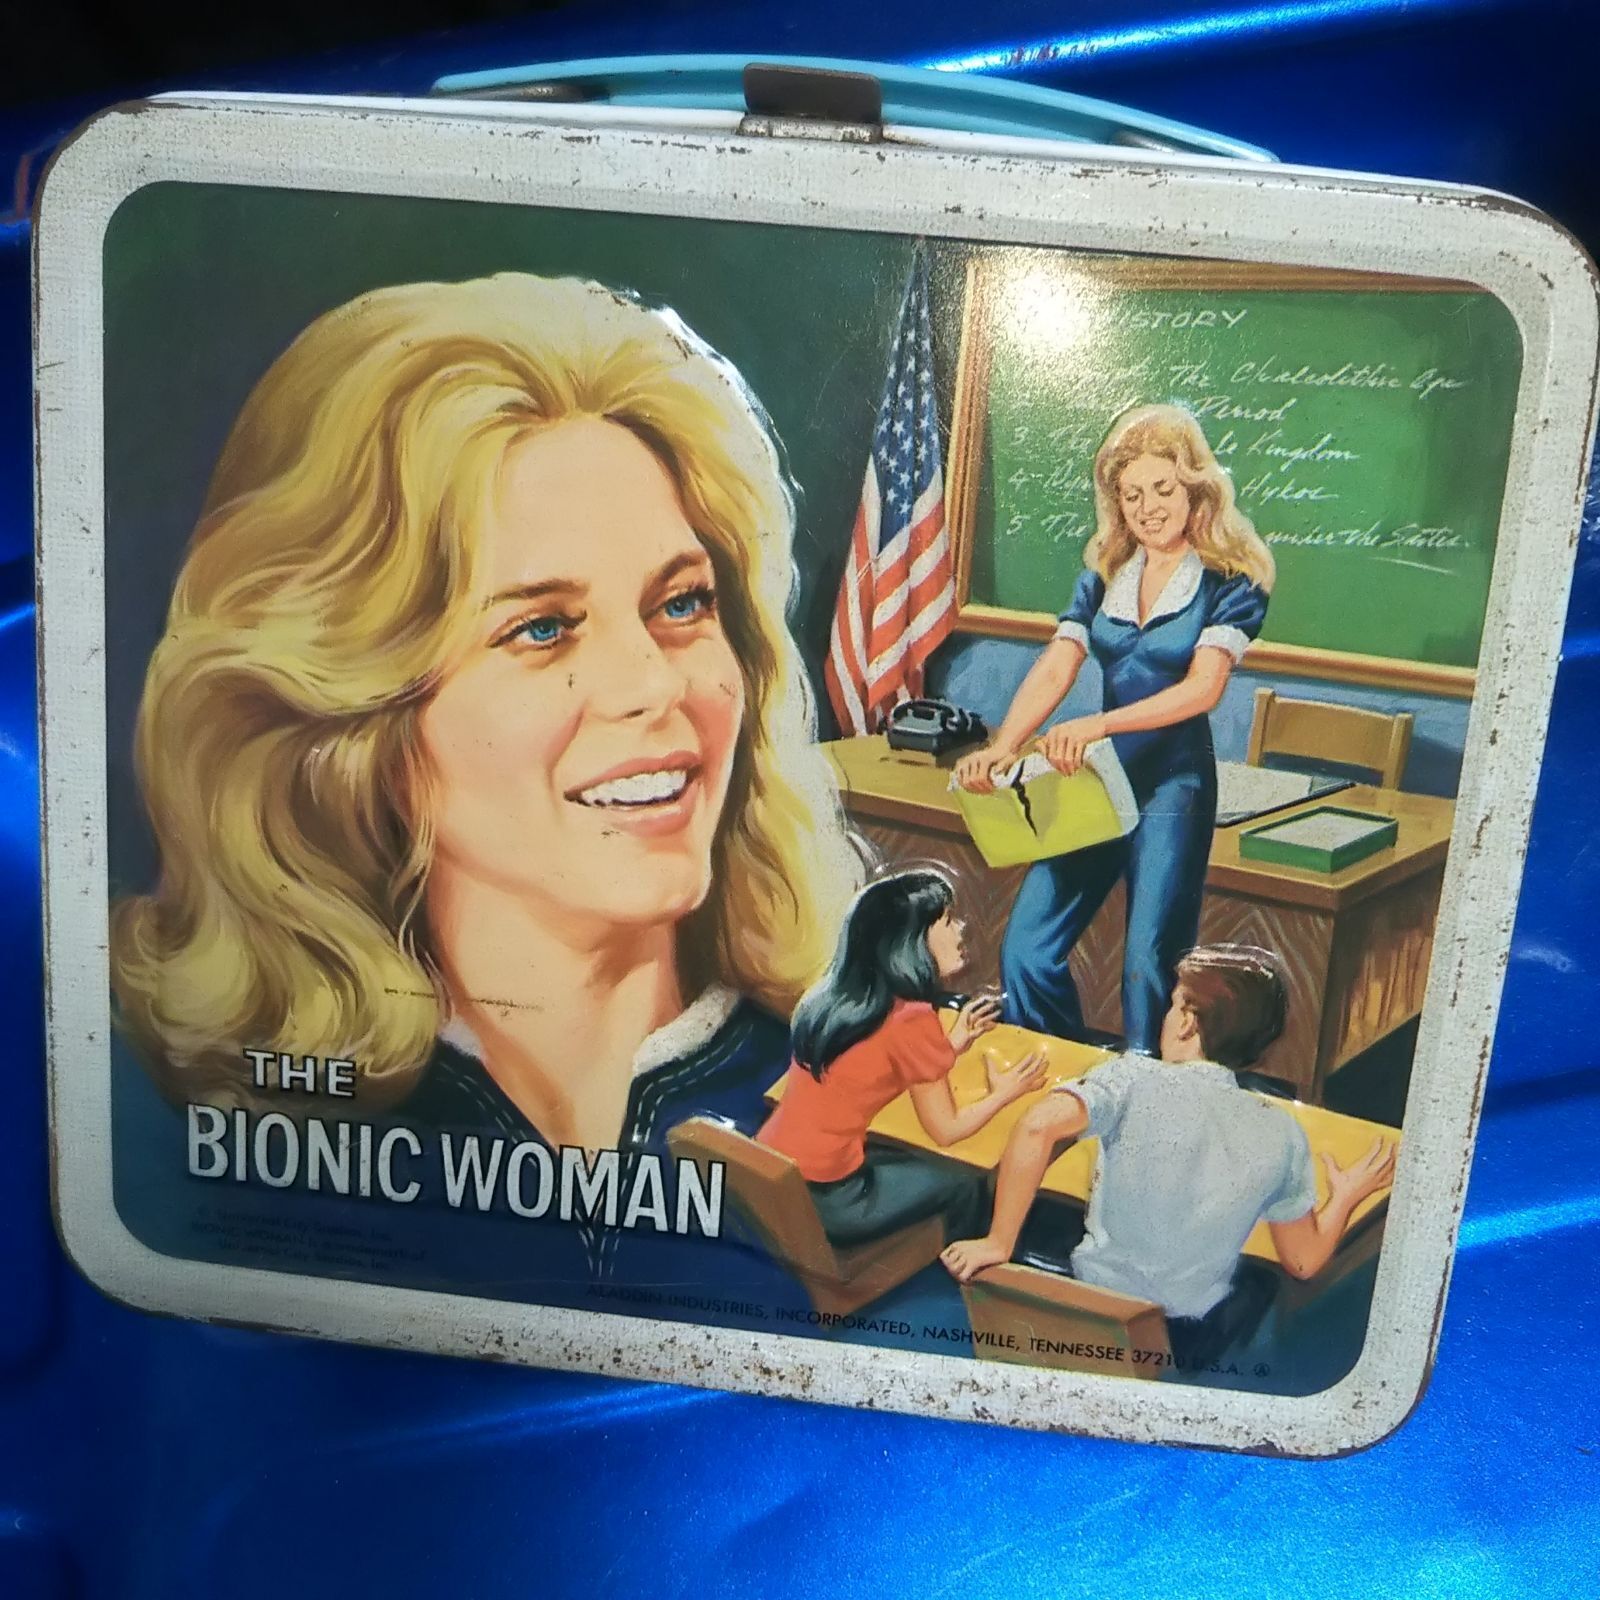 The Bionic Woman Metal Lunch Box Thermos From 1978 Lindsay Wagner Vintage NONH